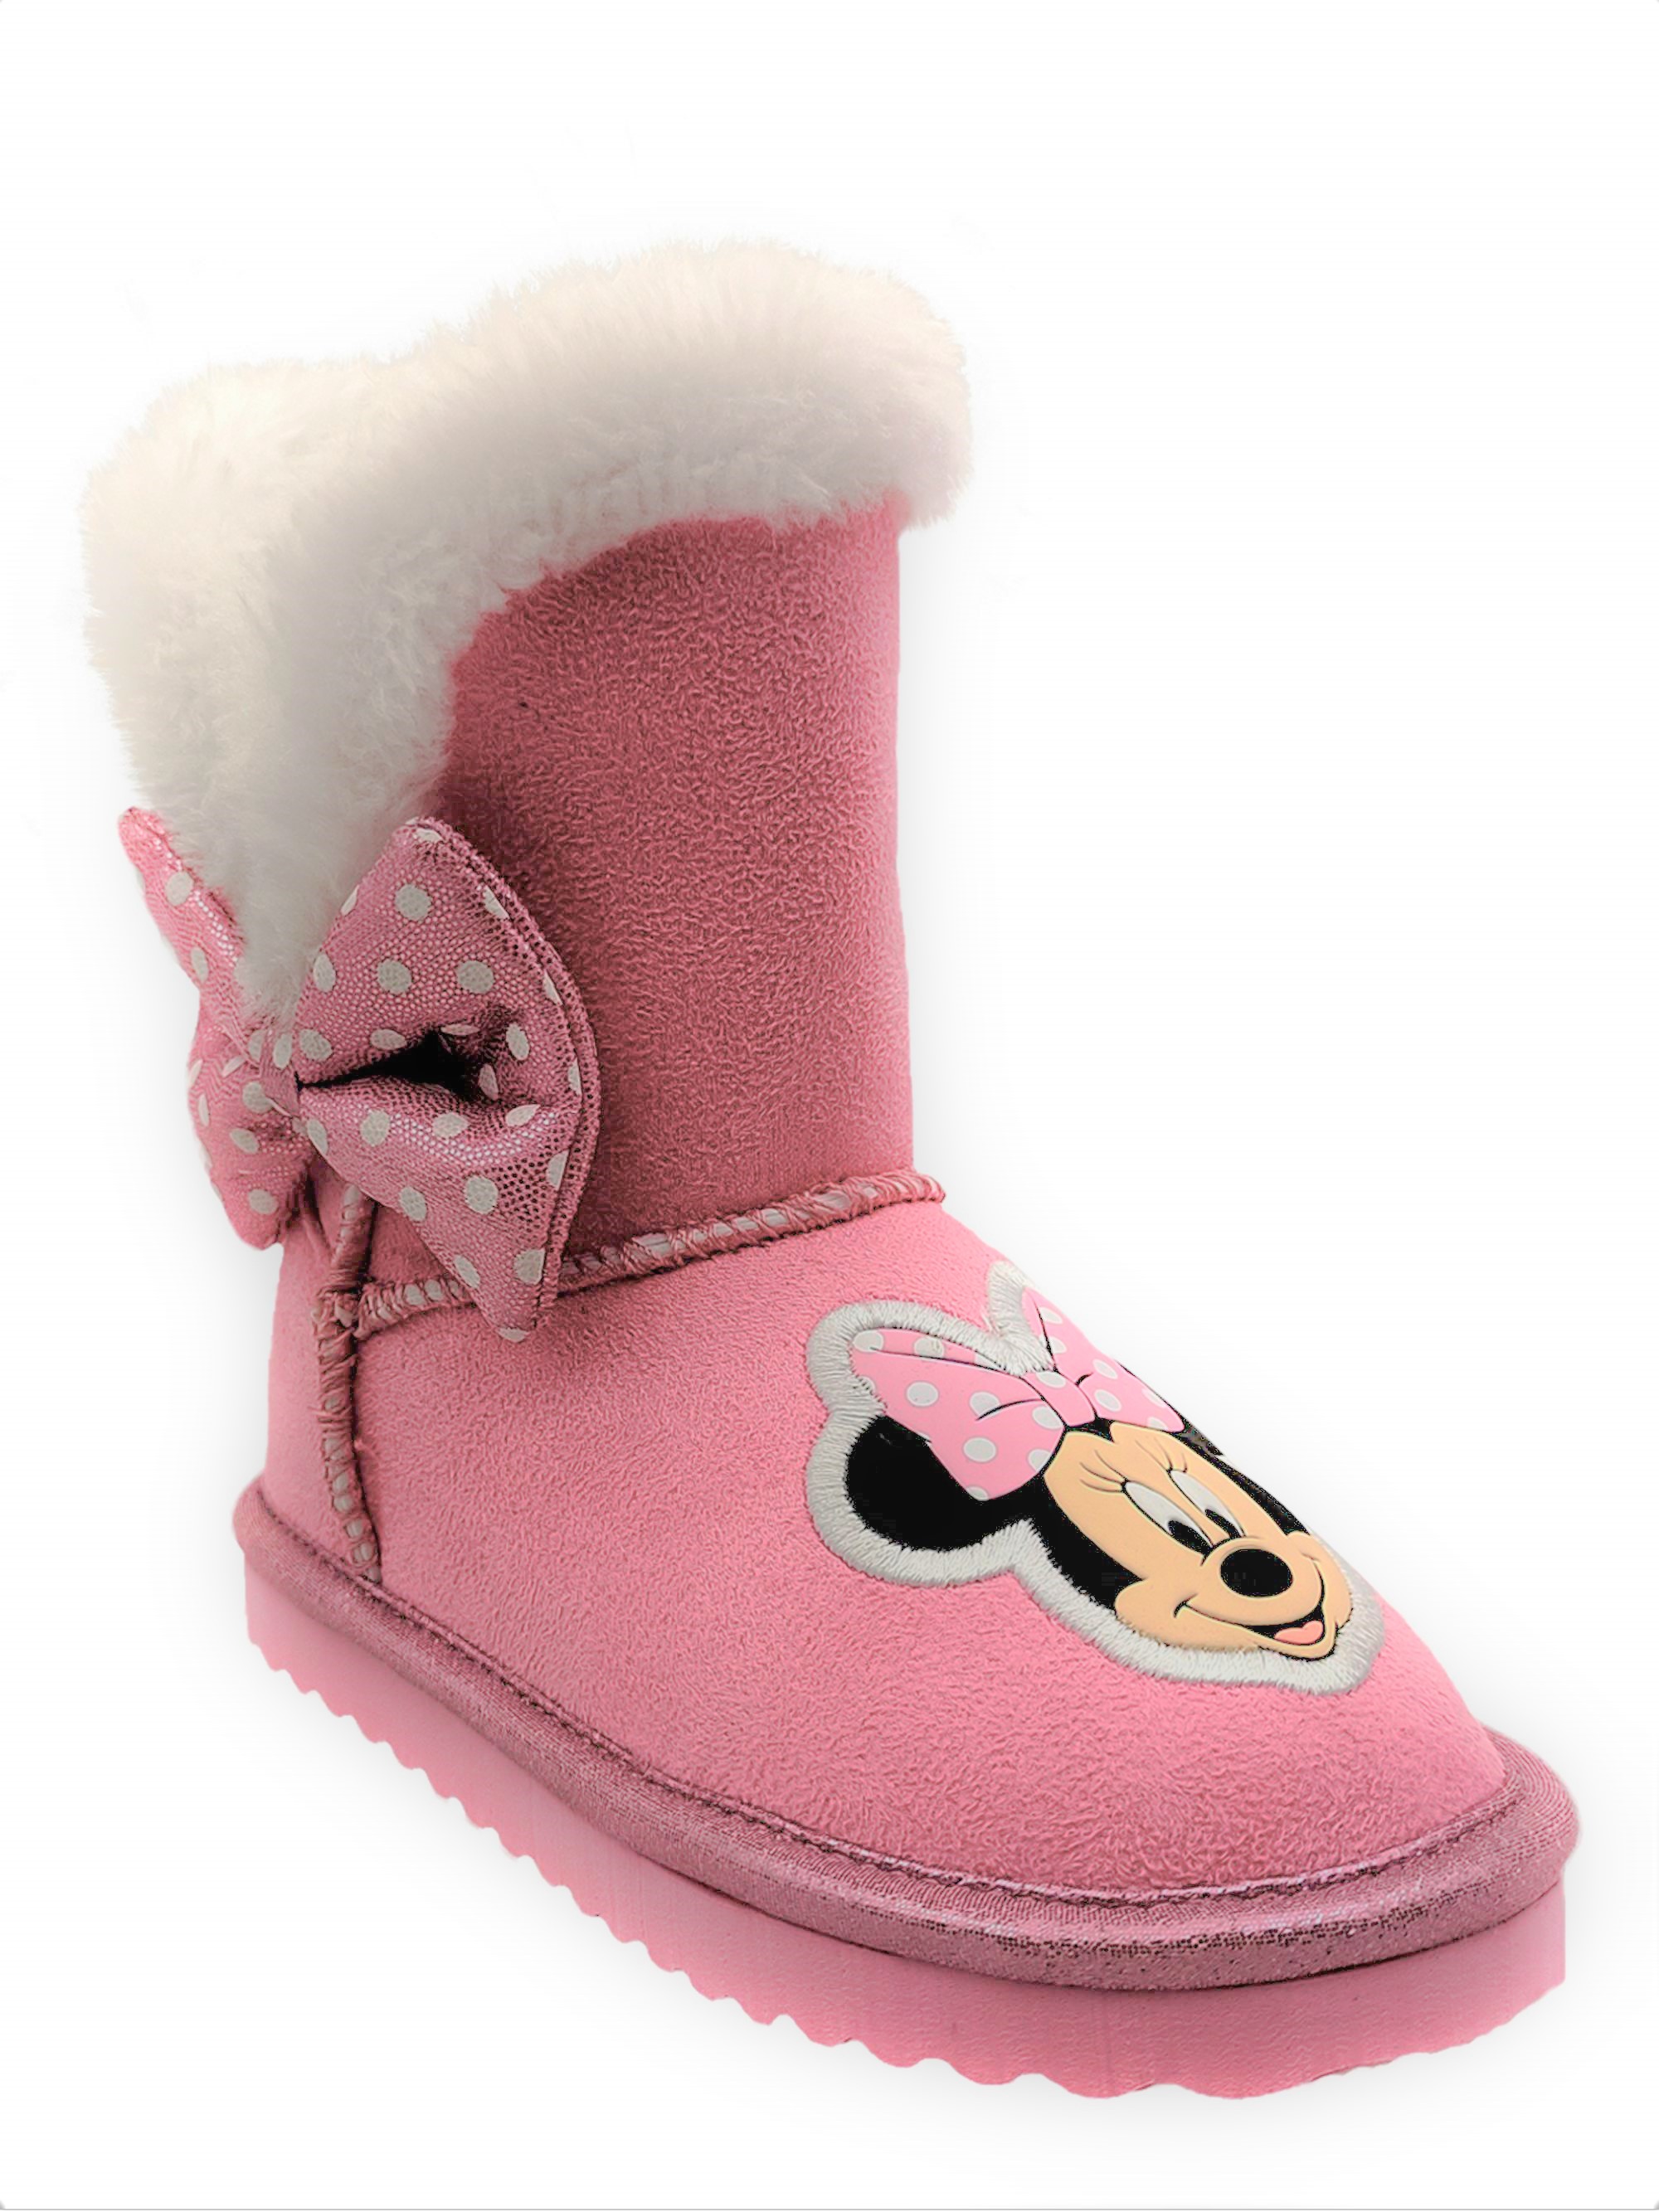 Disney Minnie Mouse Cozy Faux Shearling Winter Boot (Toddler Girls) - image 1 of 6